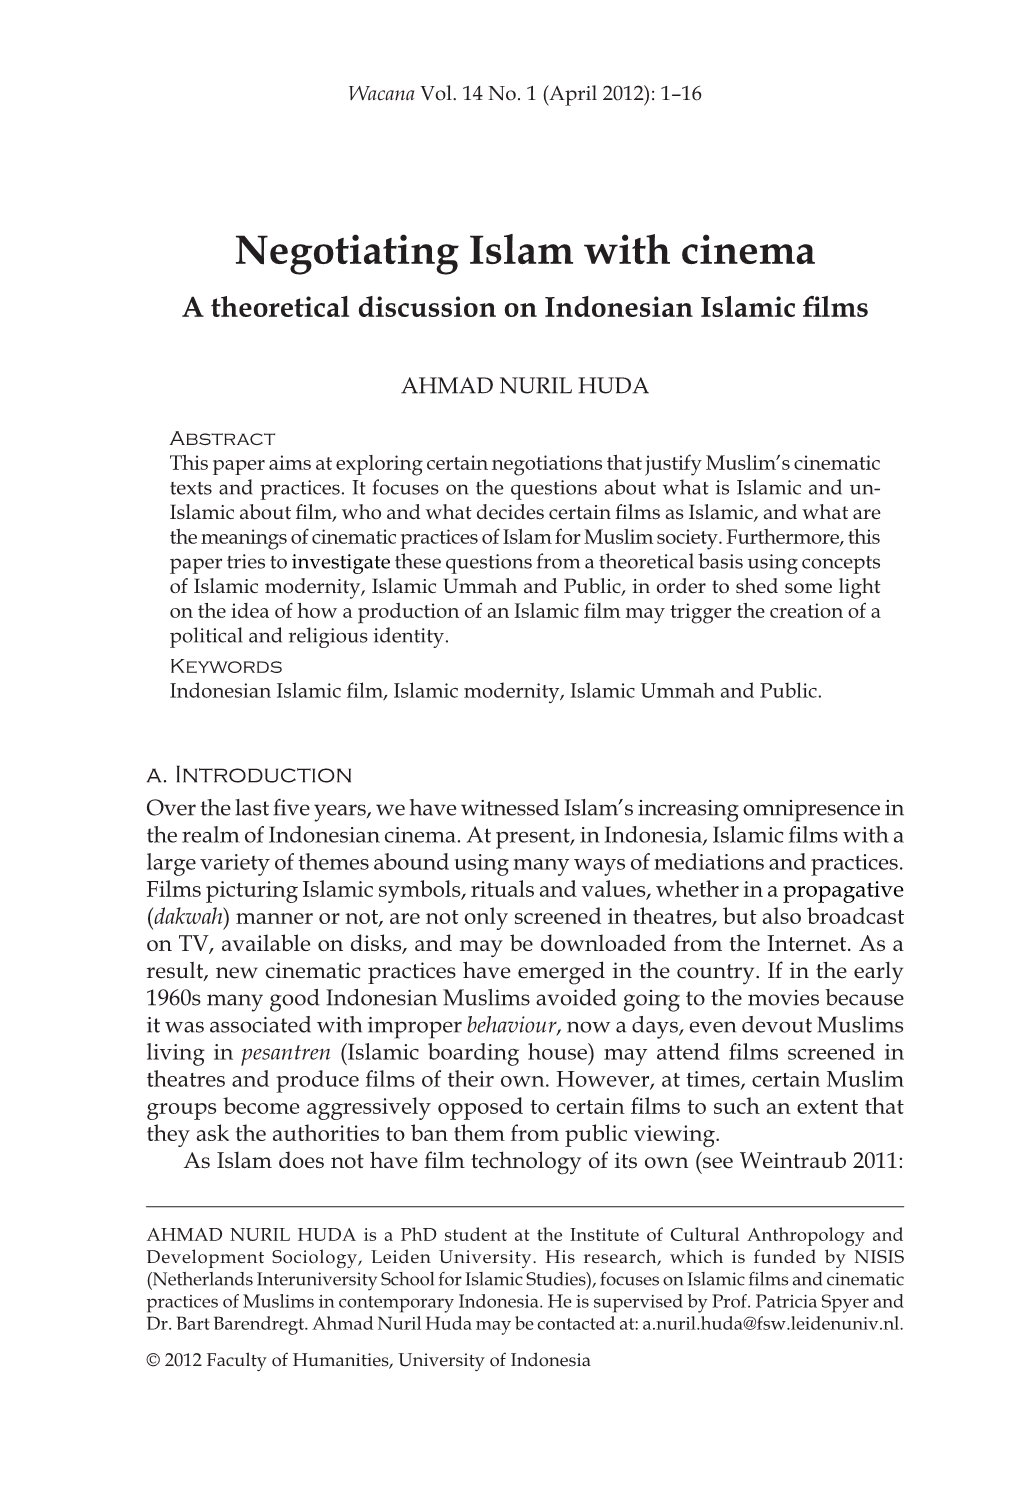 Negotiating Islam with Cinema a Theoretical Discussion on Indonesian Islamic Films